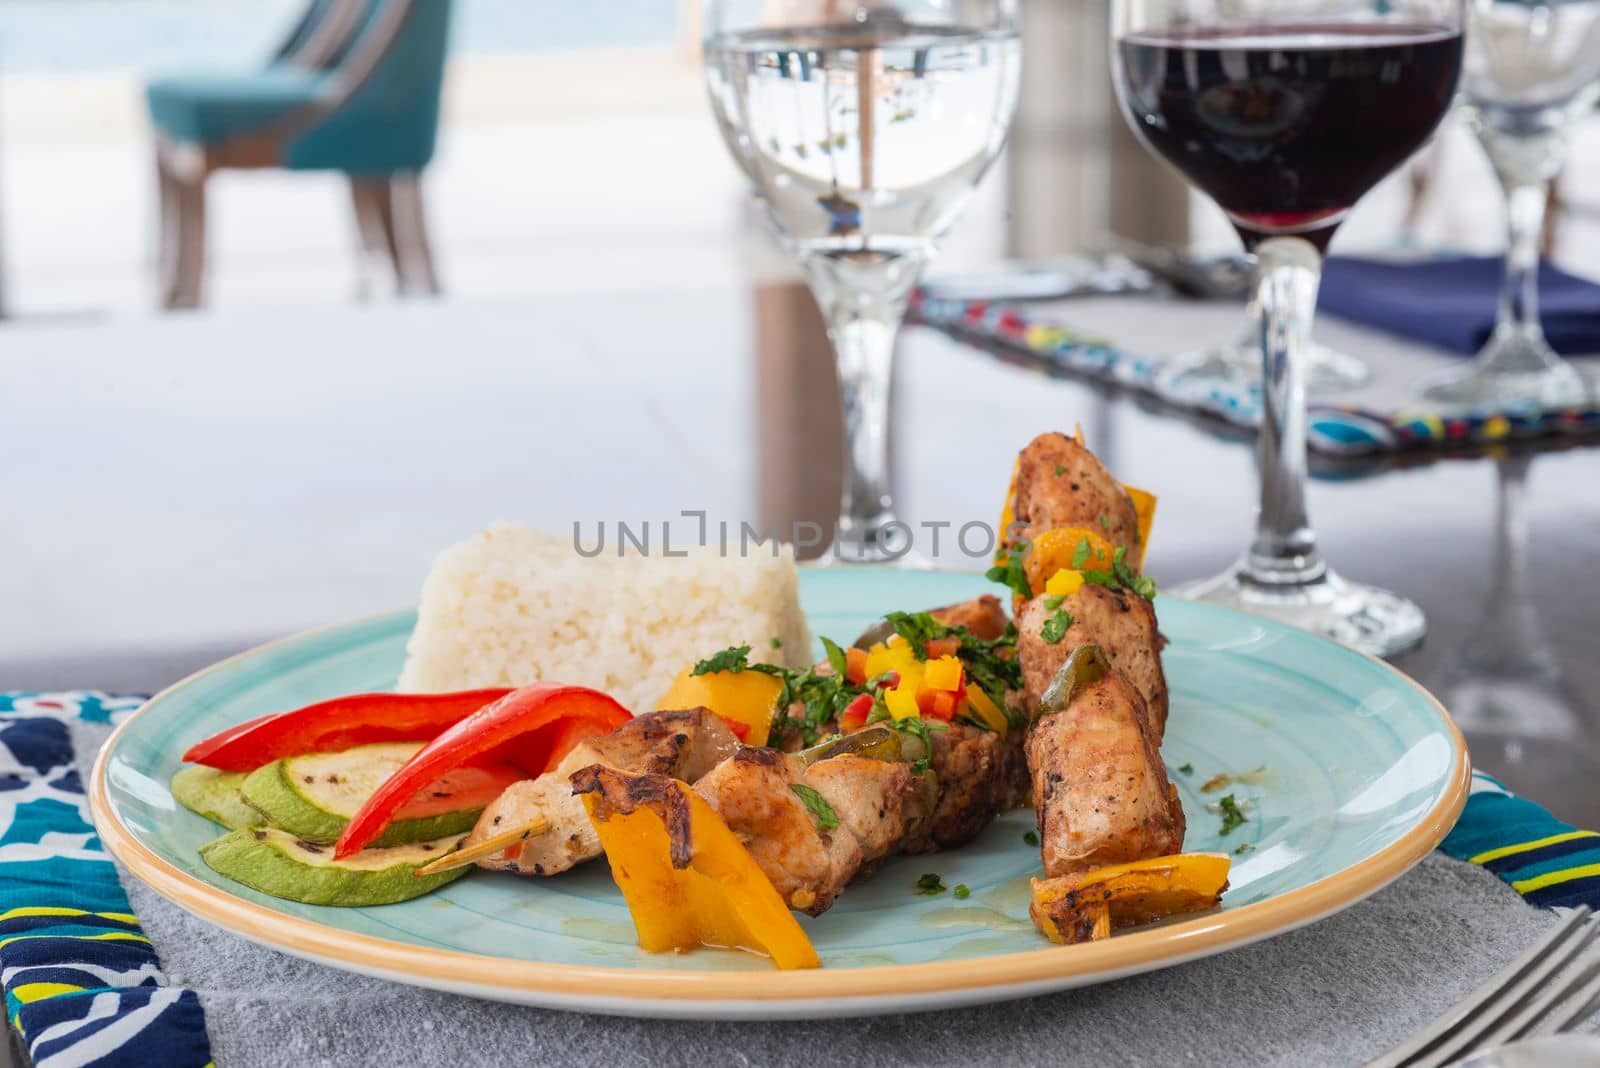 Chicken shish kebab a la carte meal with white rice by paulvinten